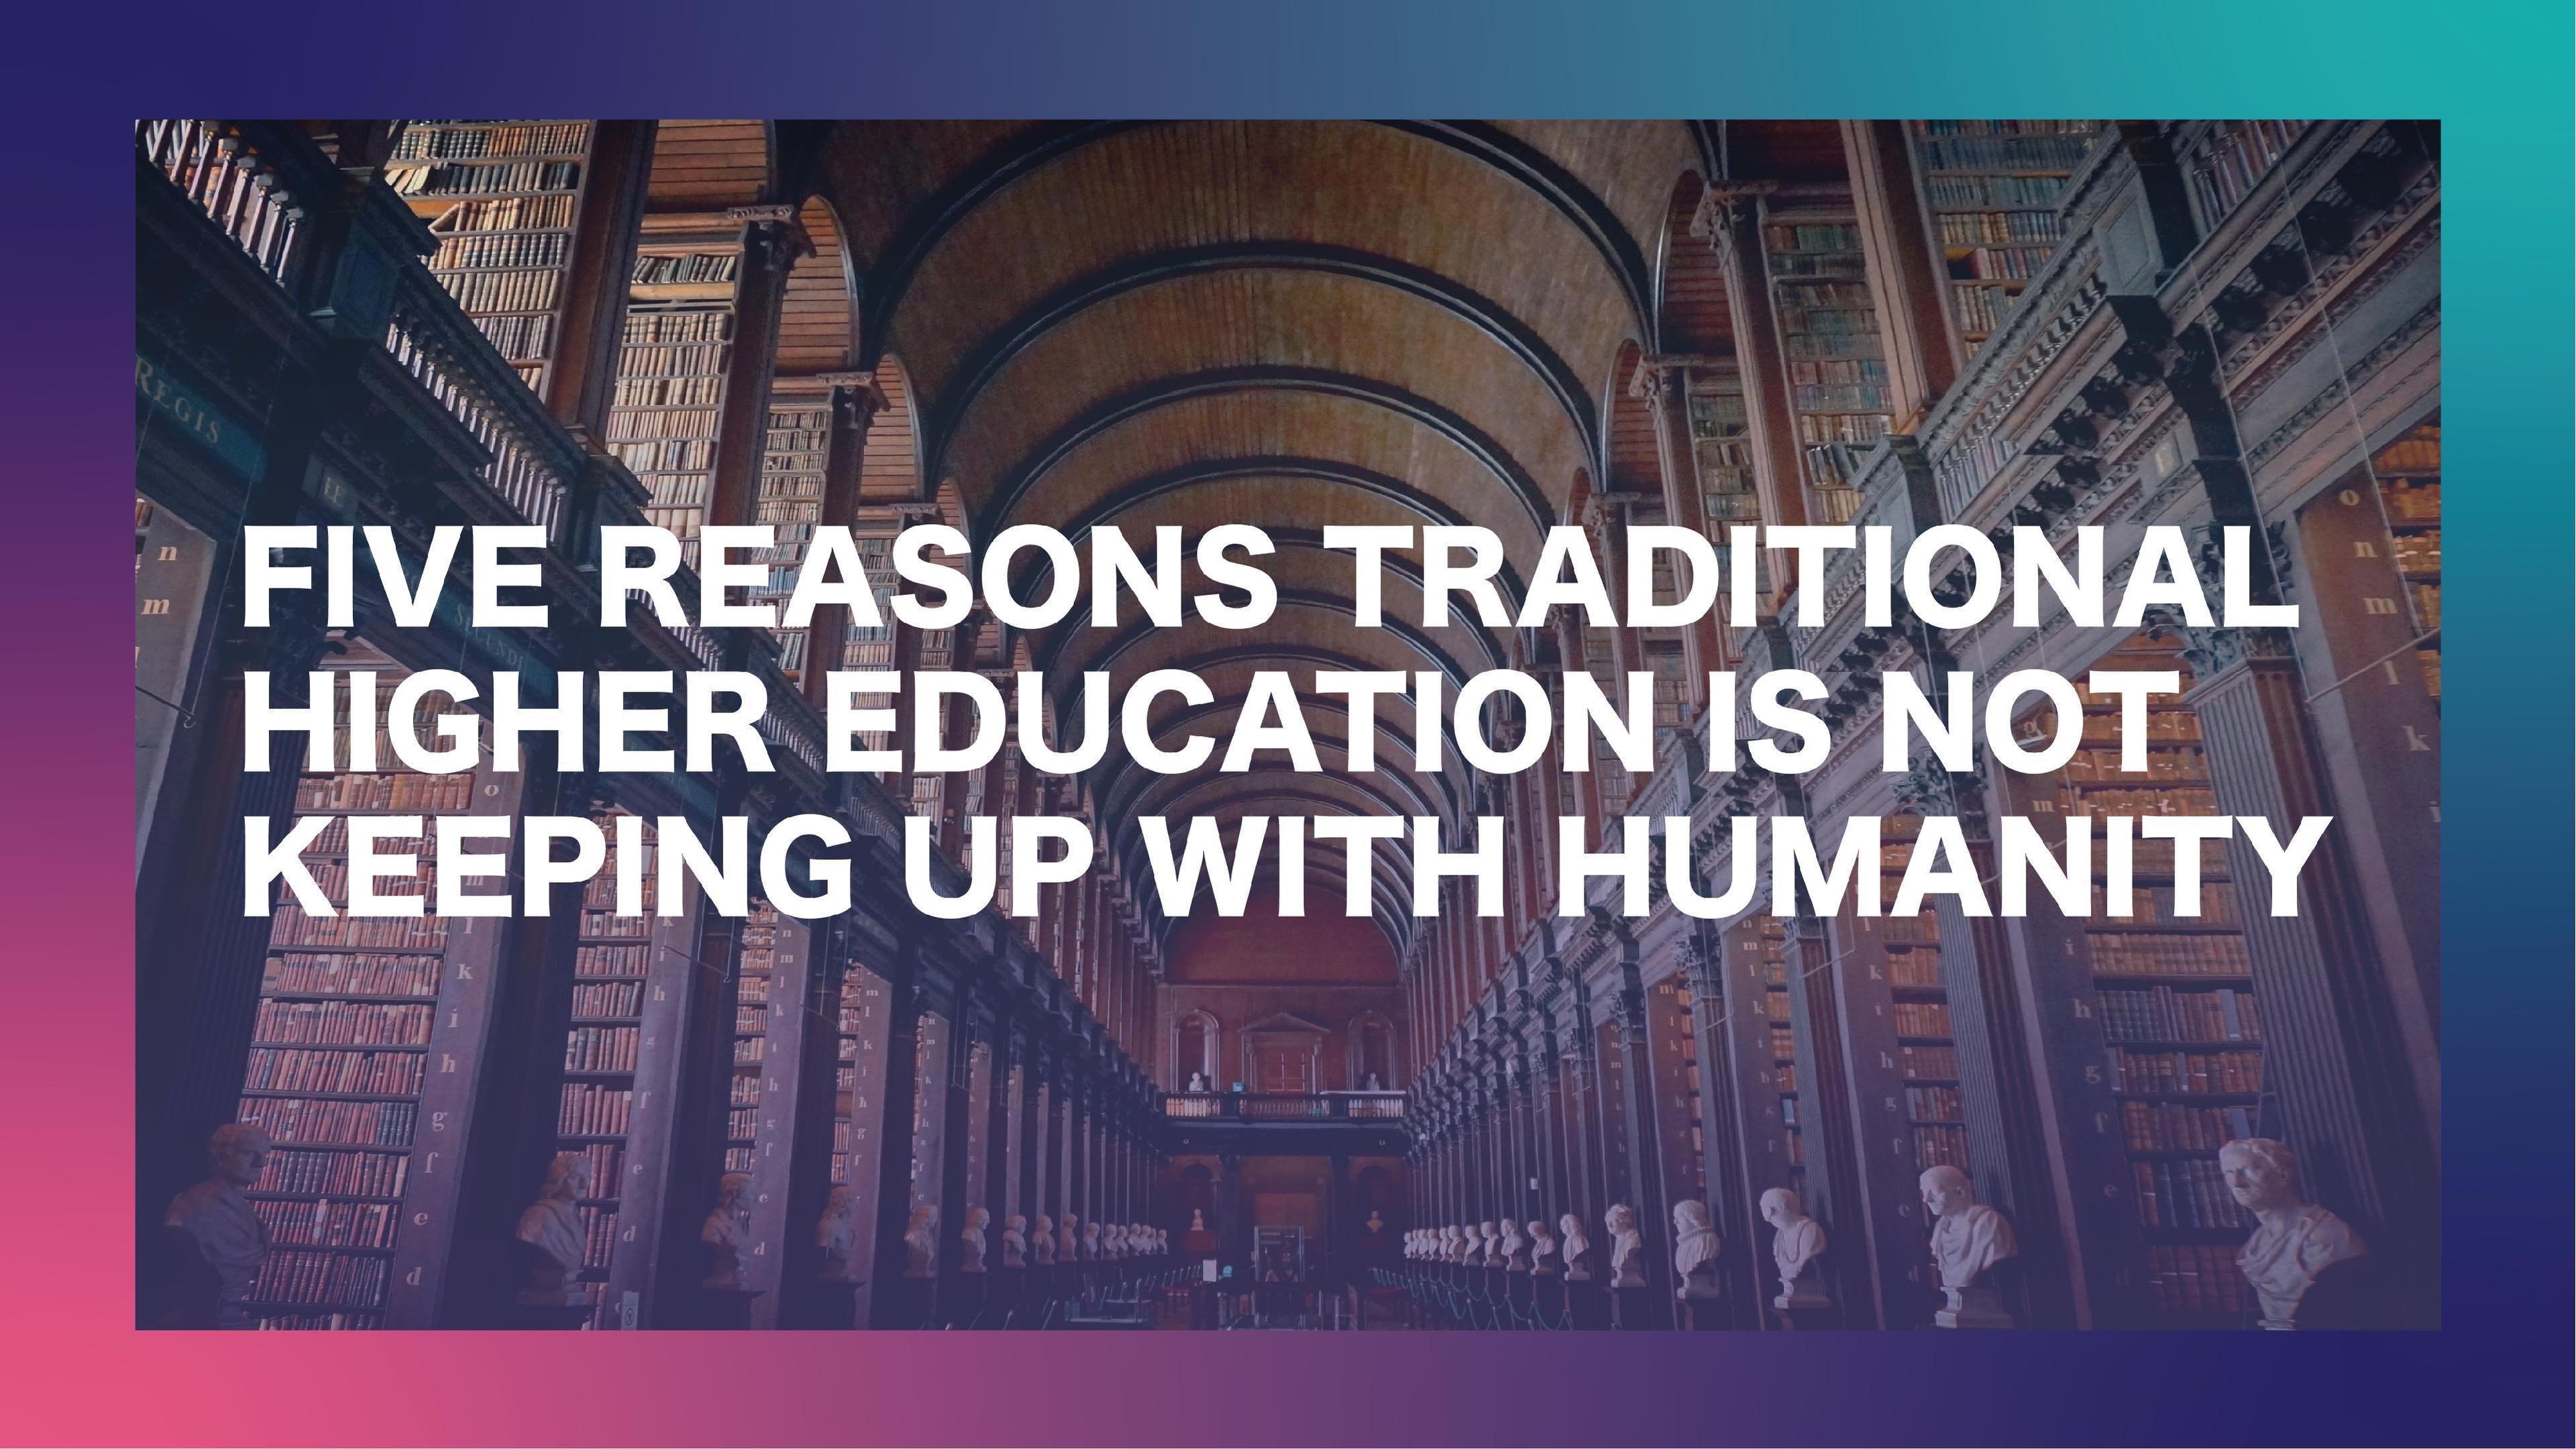 Five Reasons Traditional Education is not keeping up with humanity